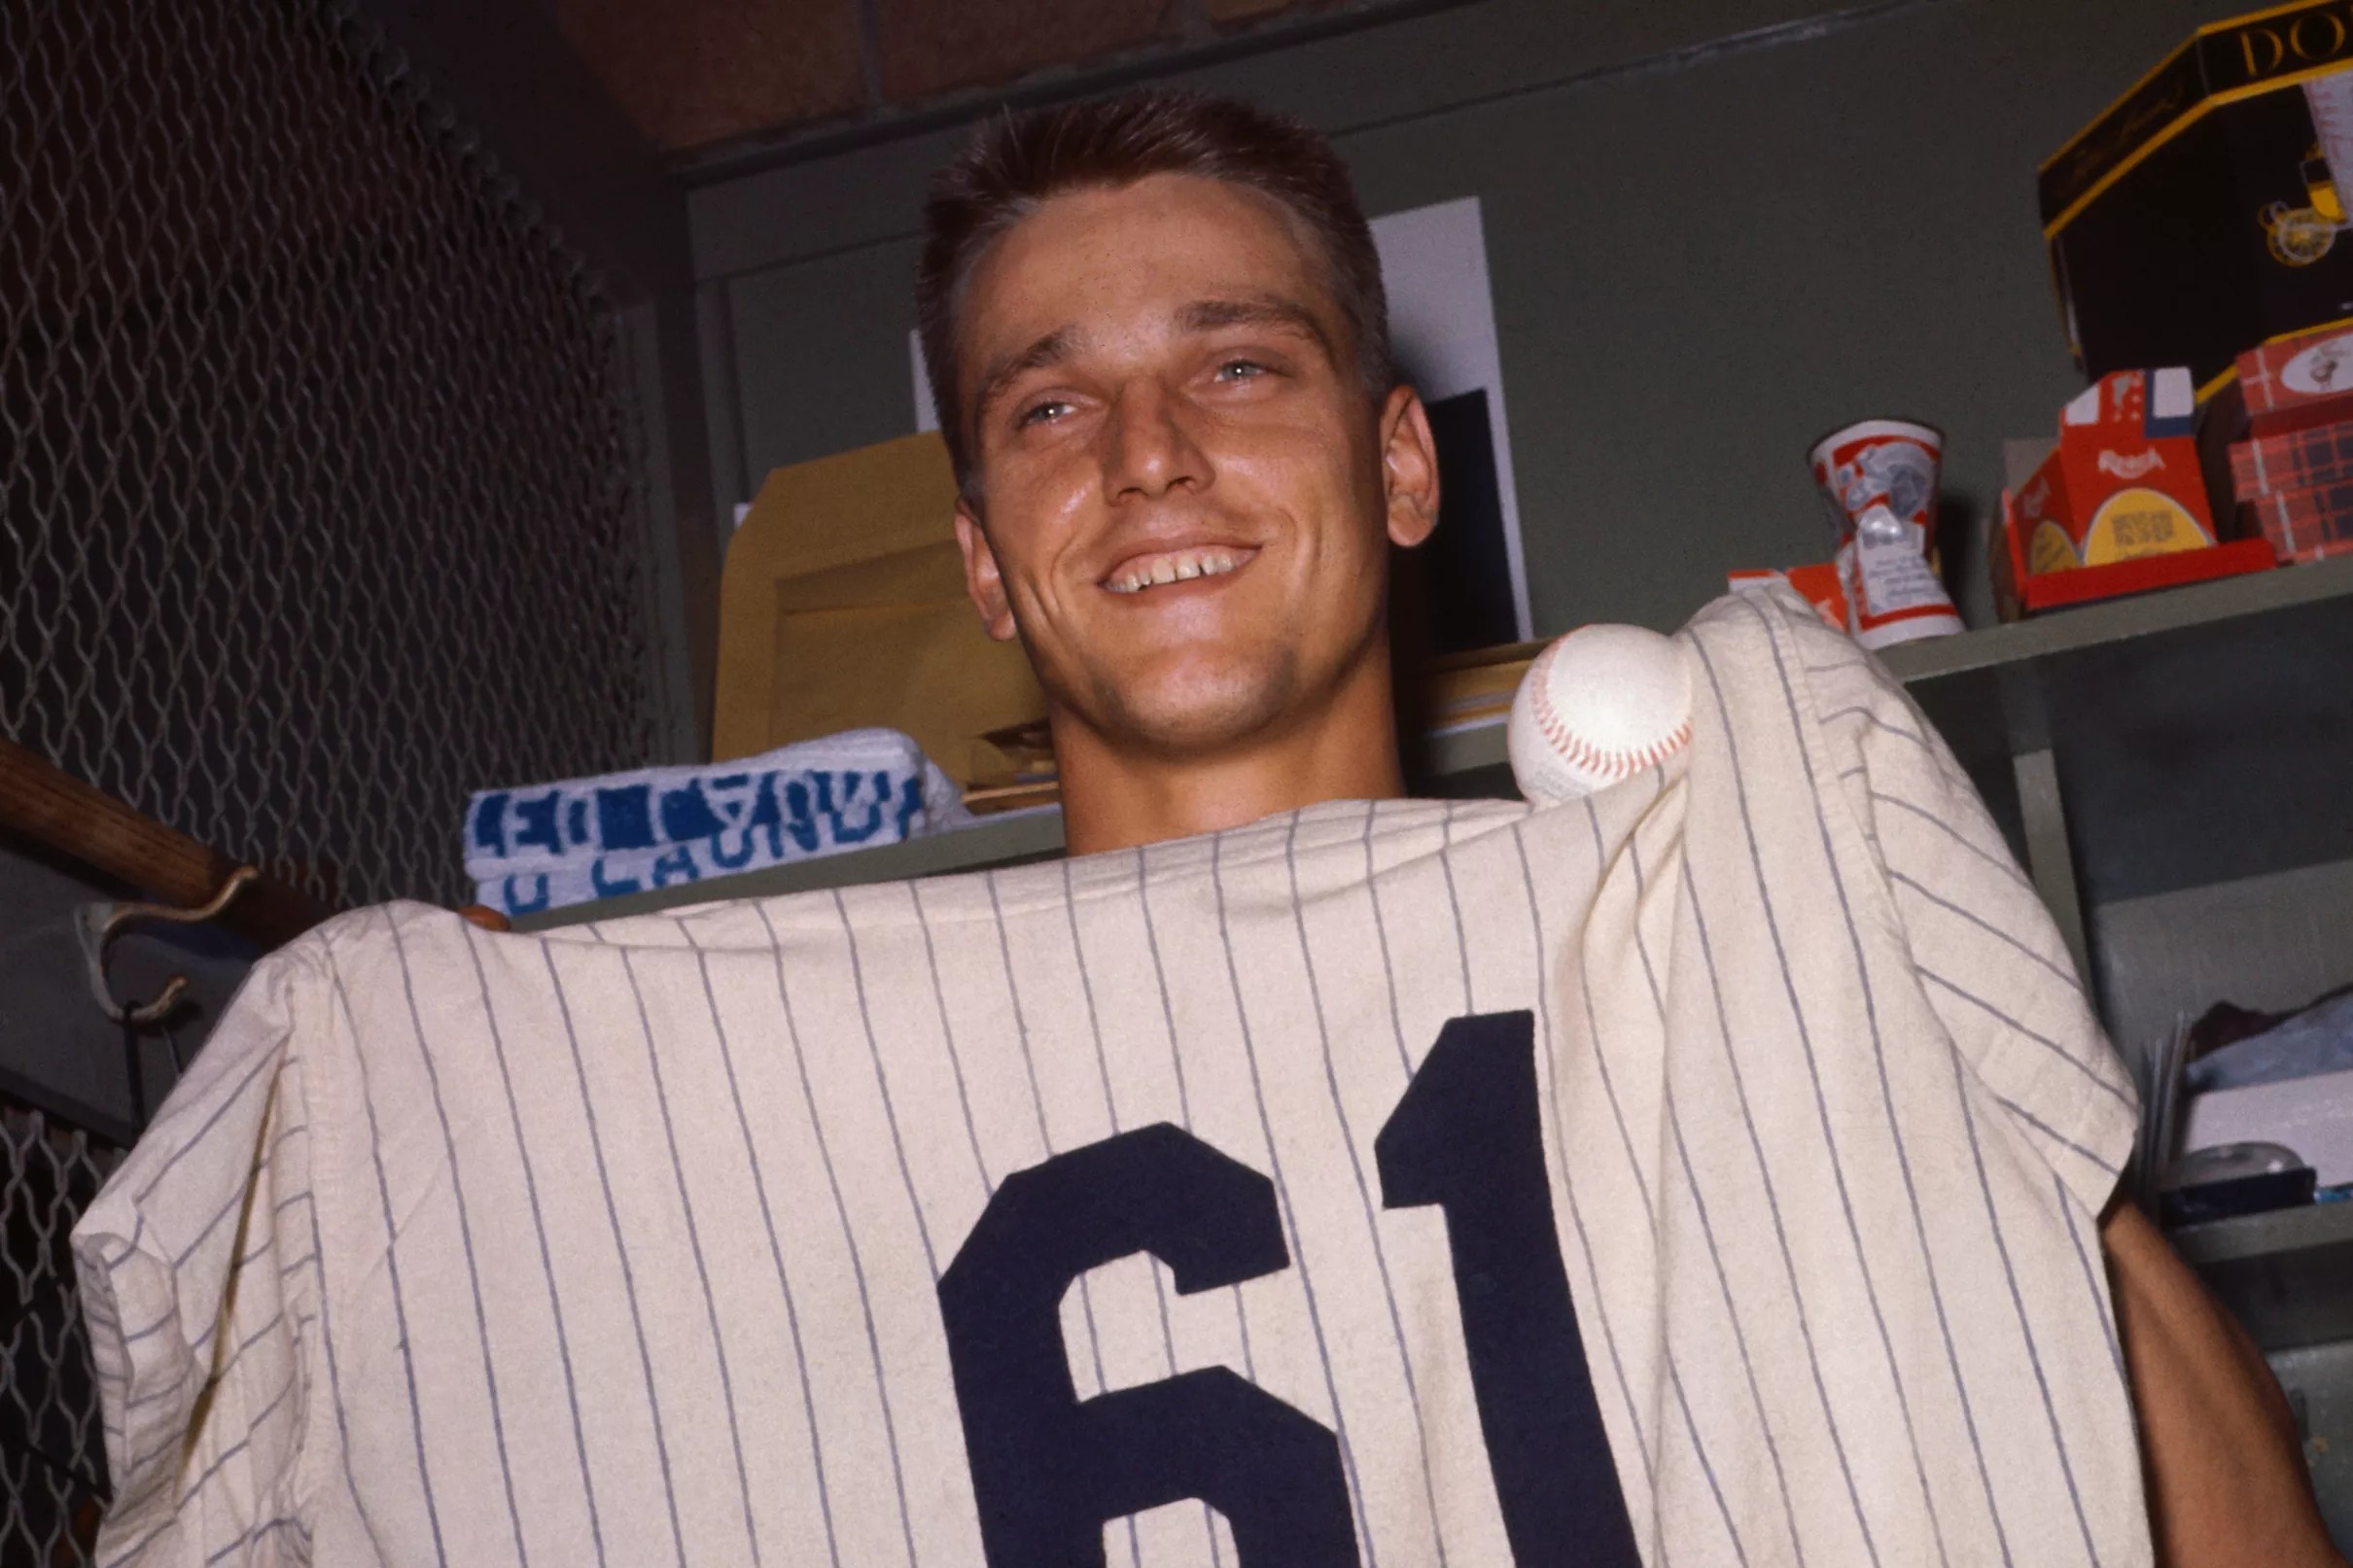 This Day in Yankees History Roger Maris passes away as home run king